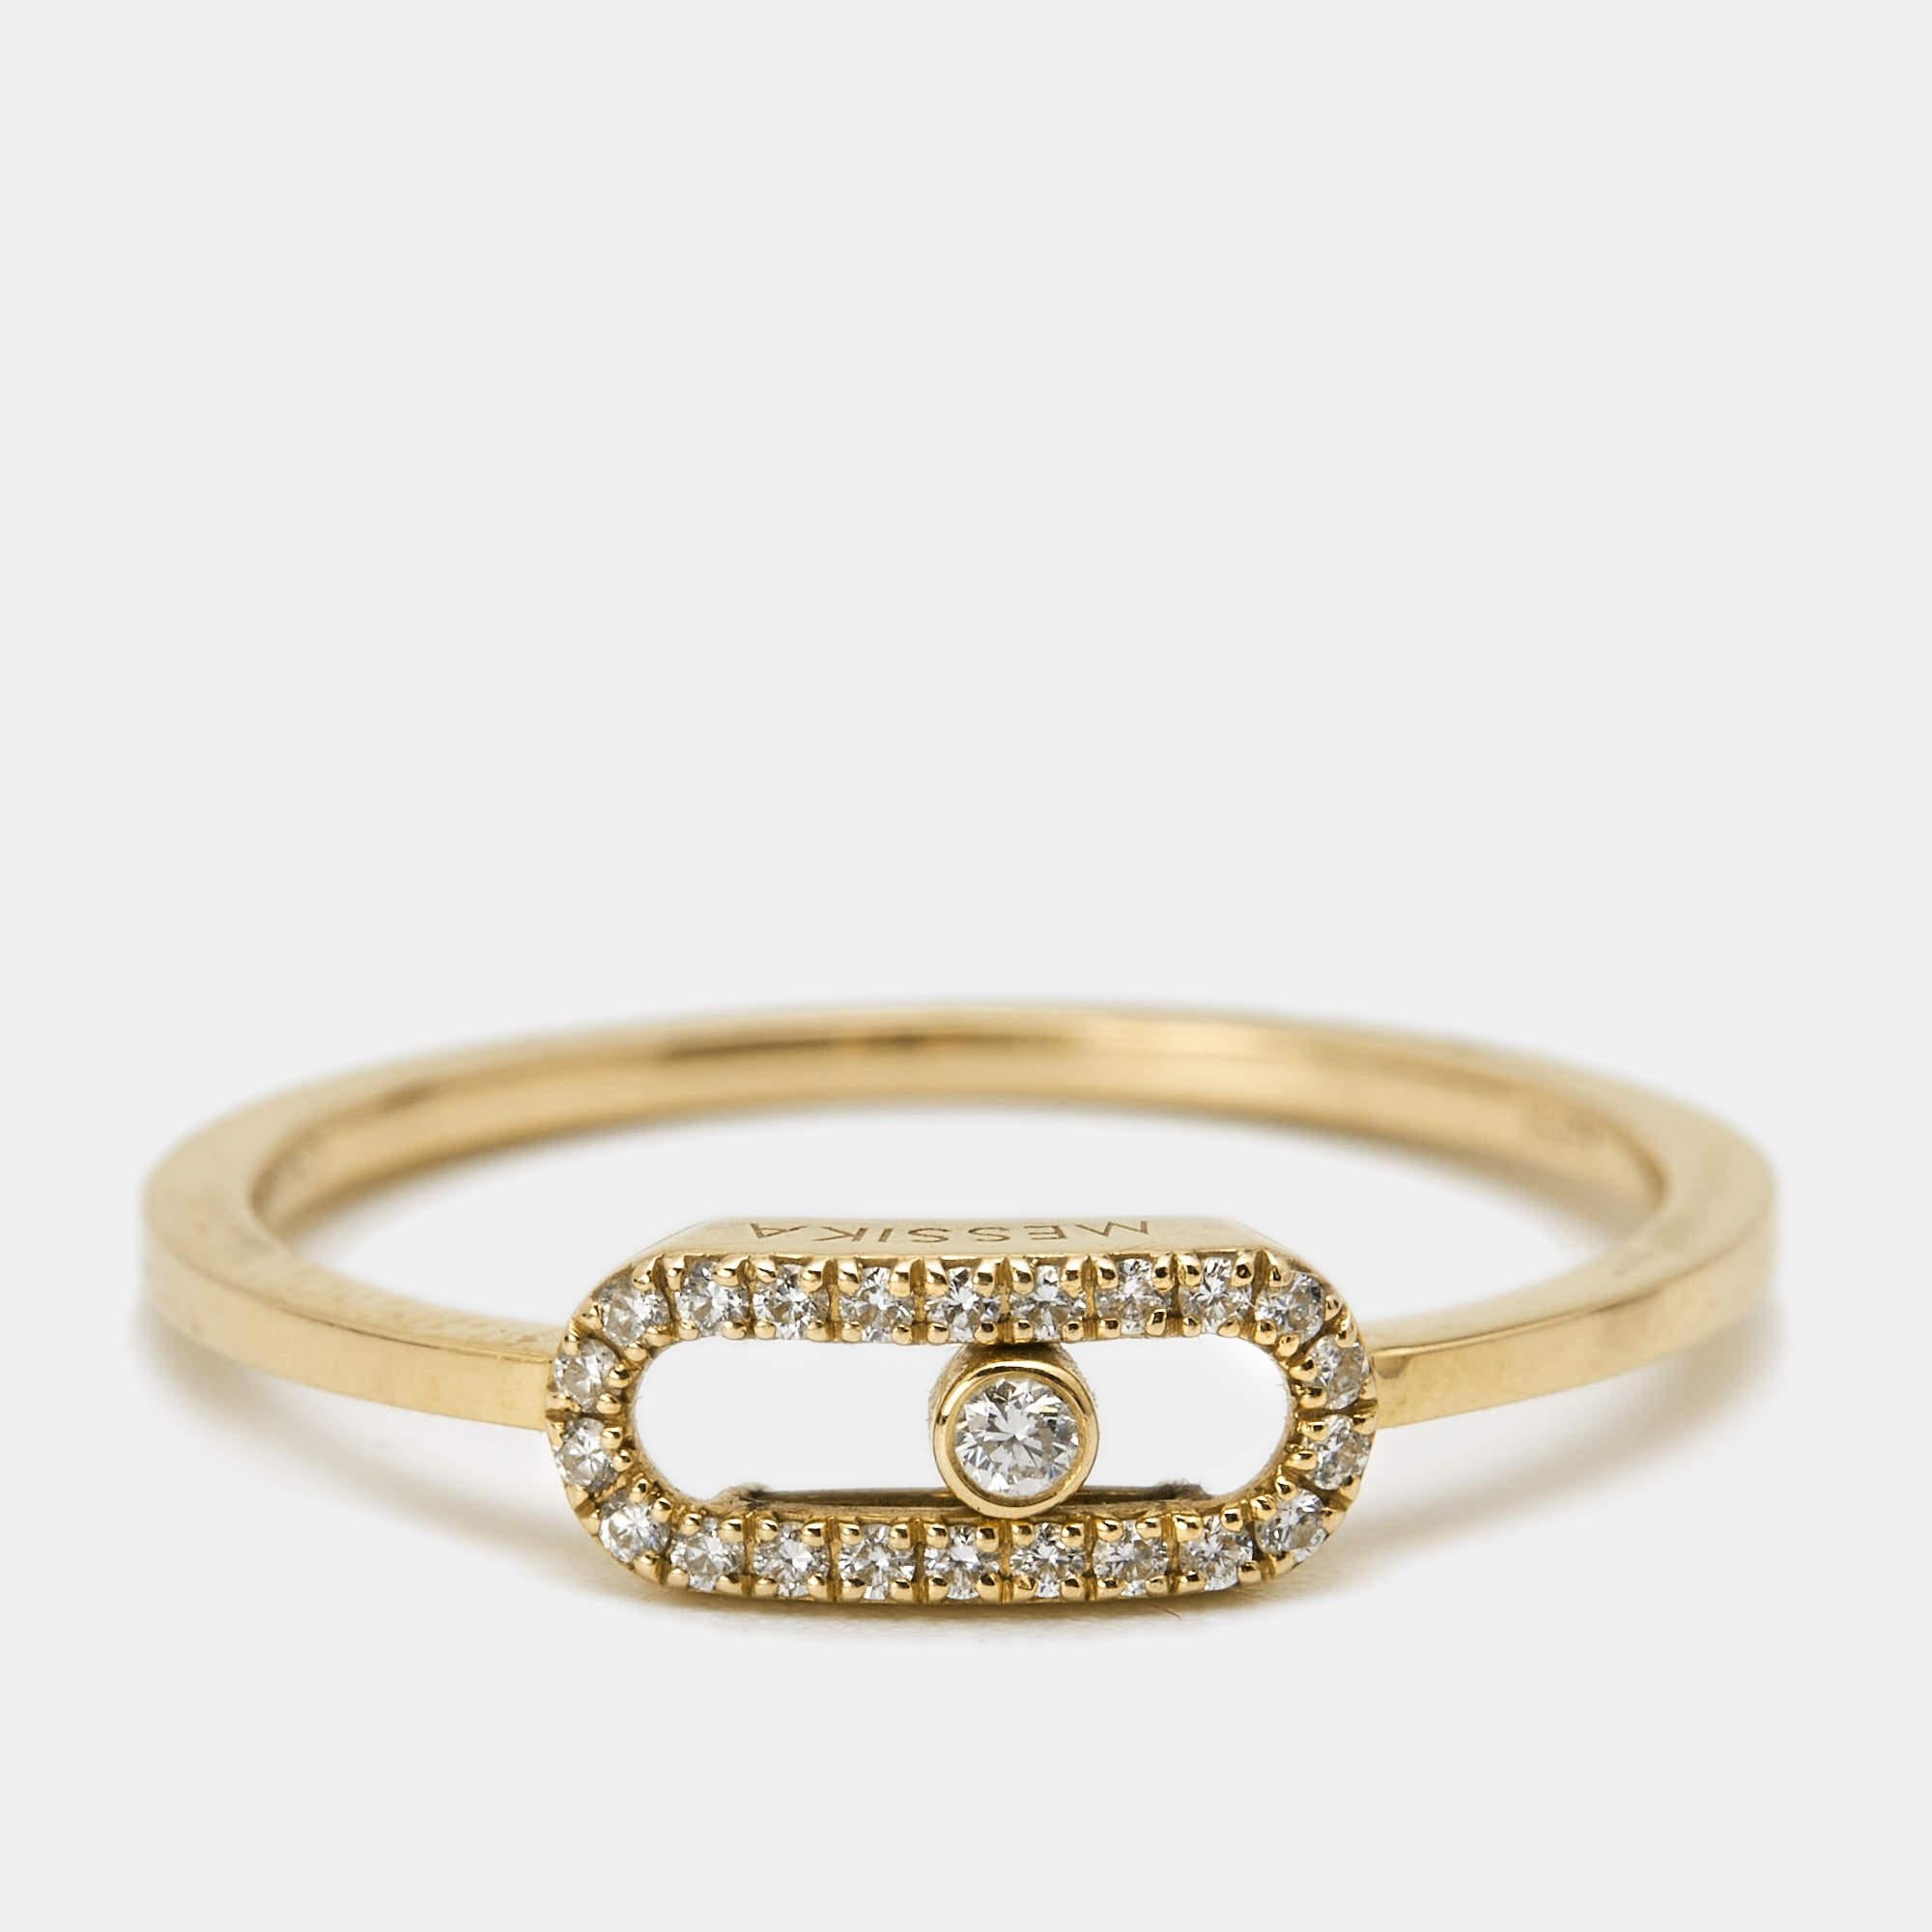 The Move collection has designs that are both wearable and timeless. This wondrous thing of beauty is handmade from 18k yellow gold with a slender band that holds a feminine diamond-encrusted cage. Within the motif, a single diamond is trapped, and